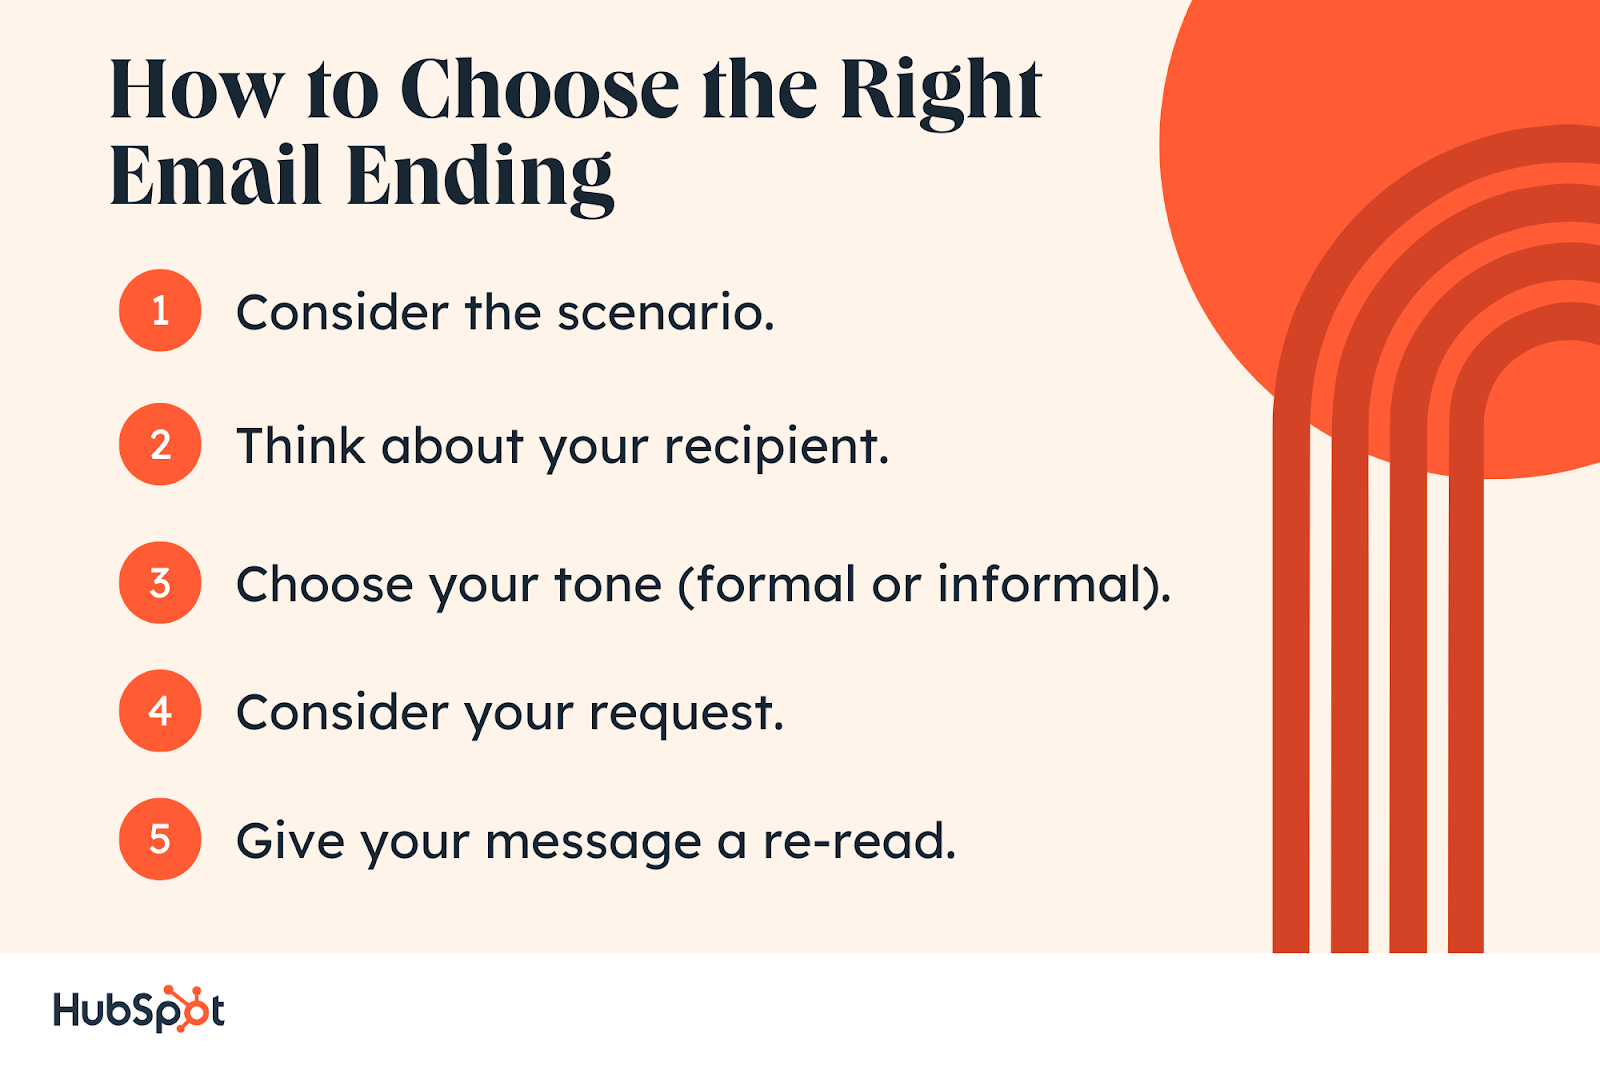 How to Choose the Right Email Ending. Consider the scenario. Think about your recipient. Choose your tone (formal or informal). Consider your request. Give your message a re-read.